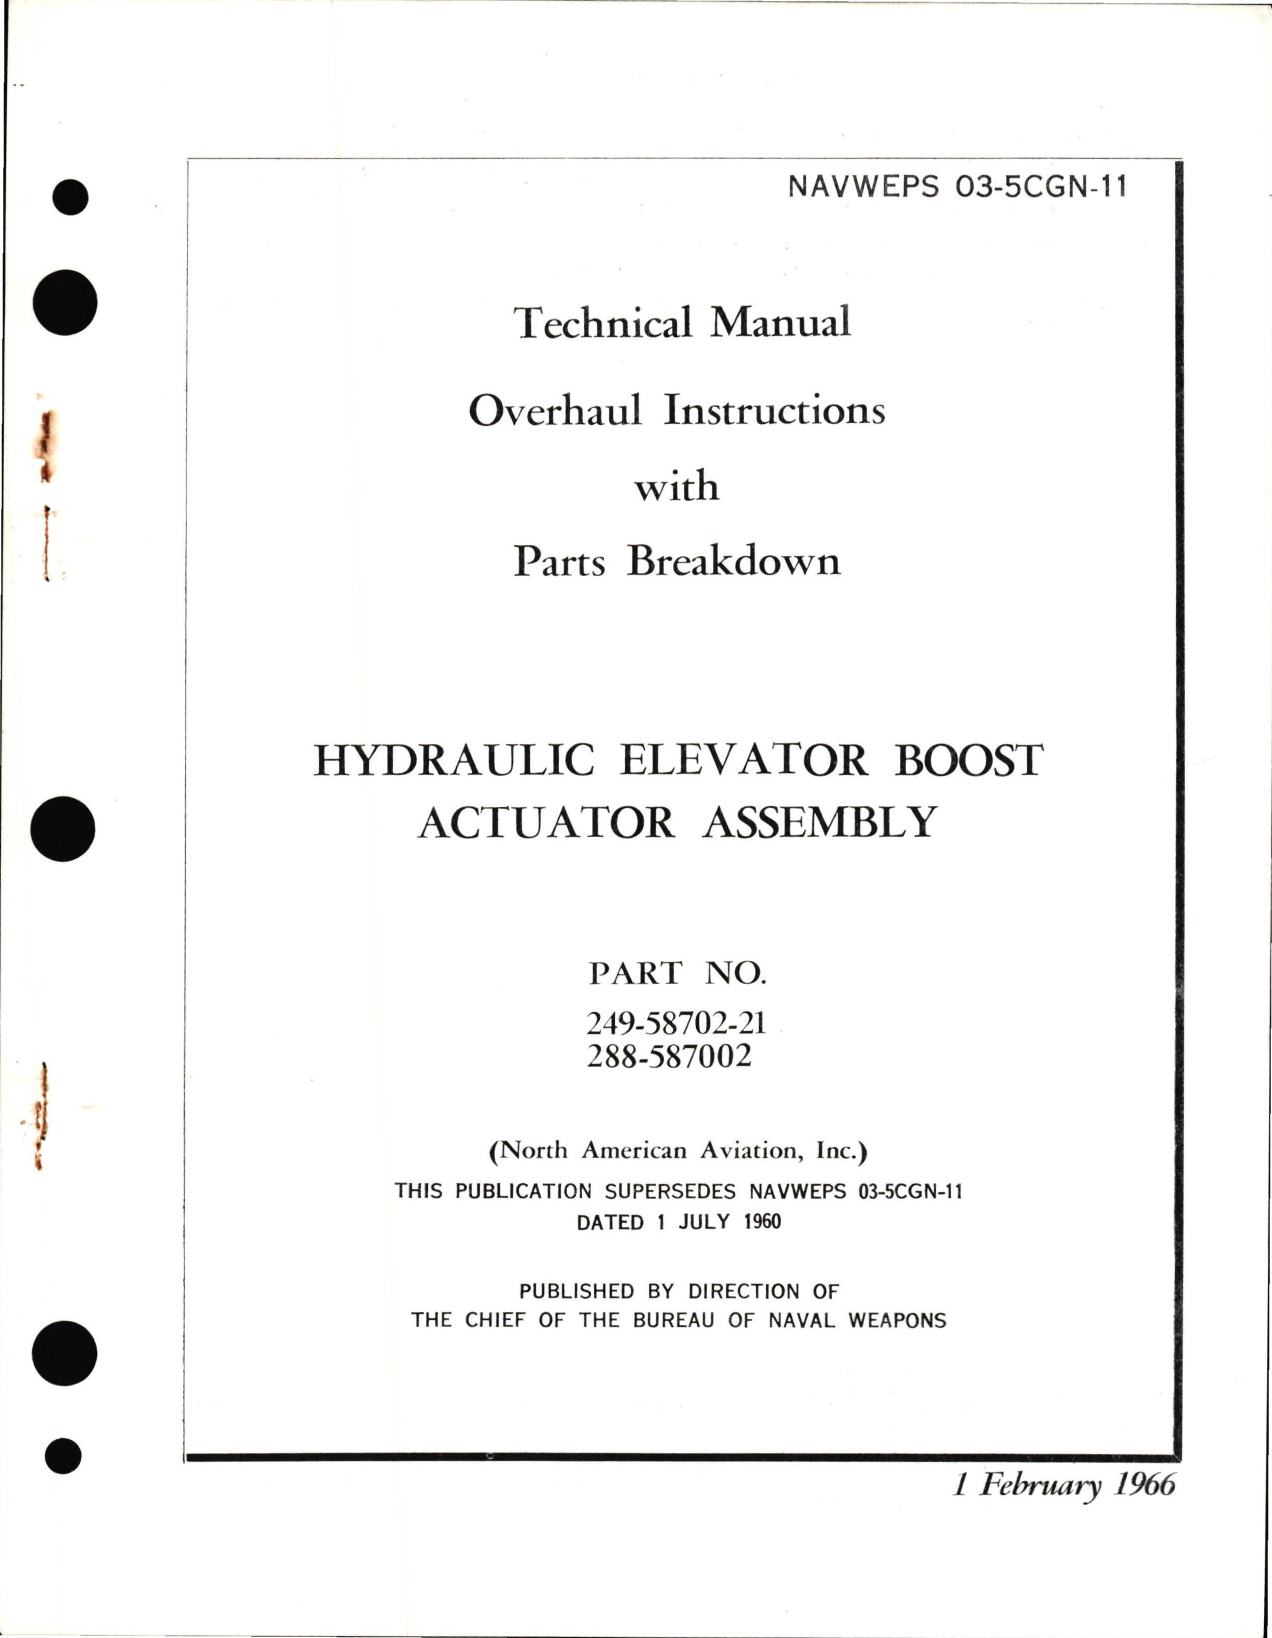 Sample page 1 from AirCorps Library document: Overhaul Instructions with Parts Breakdown for Hydraulic Elevator Boost Actuator Assembly - Part 249-58702-21 and 288-587002